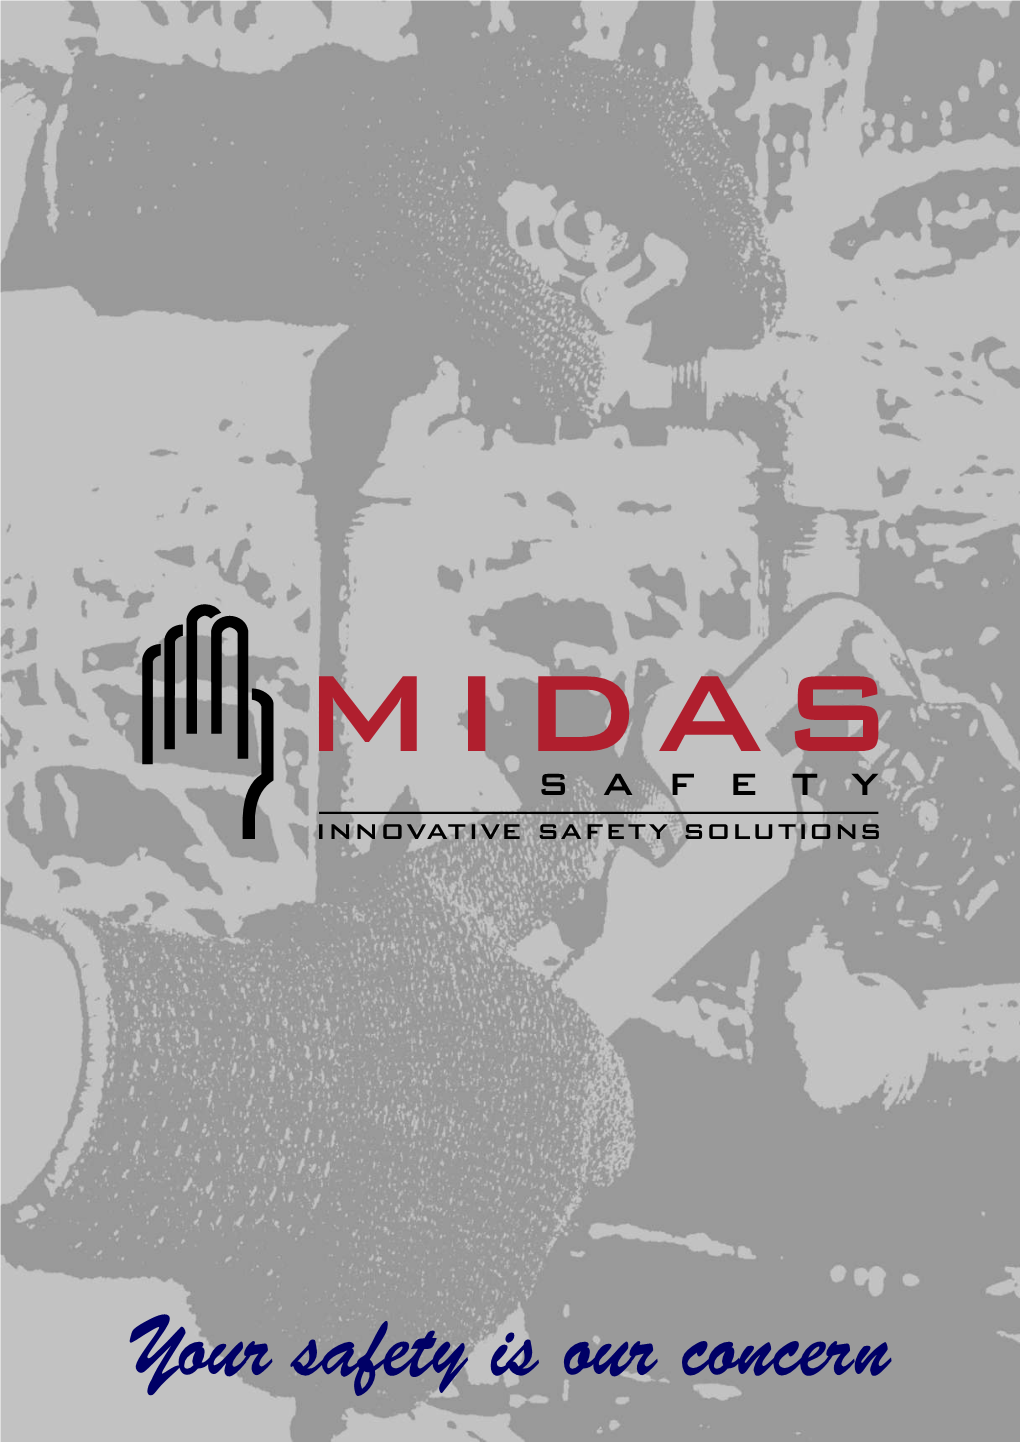 Midas Safety Pvt. Ltd. (Formerly Frontier Safety Products Pvt Ltd.)